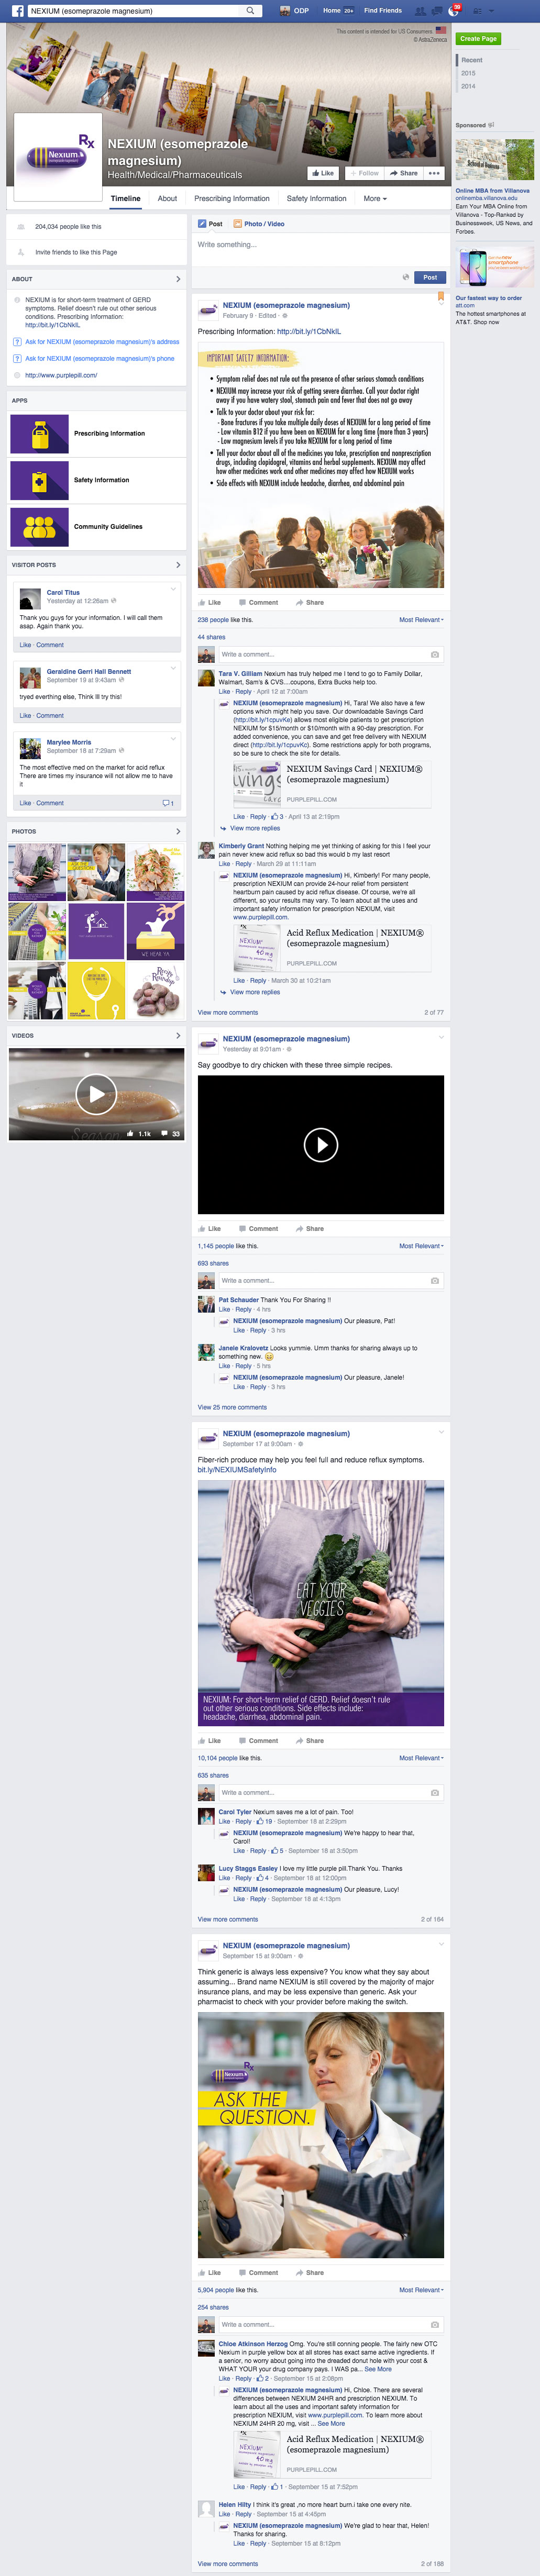 Prescription pharma drug on Facebook with comments enabled